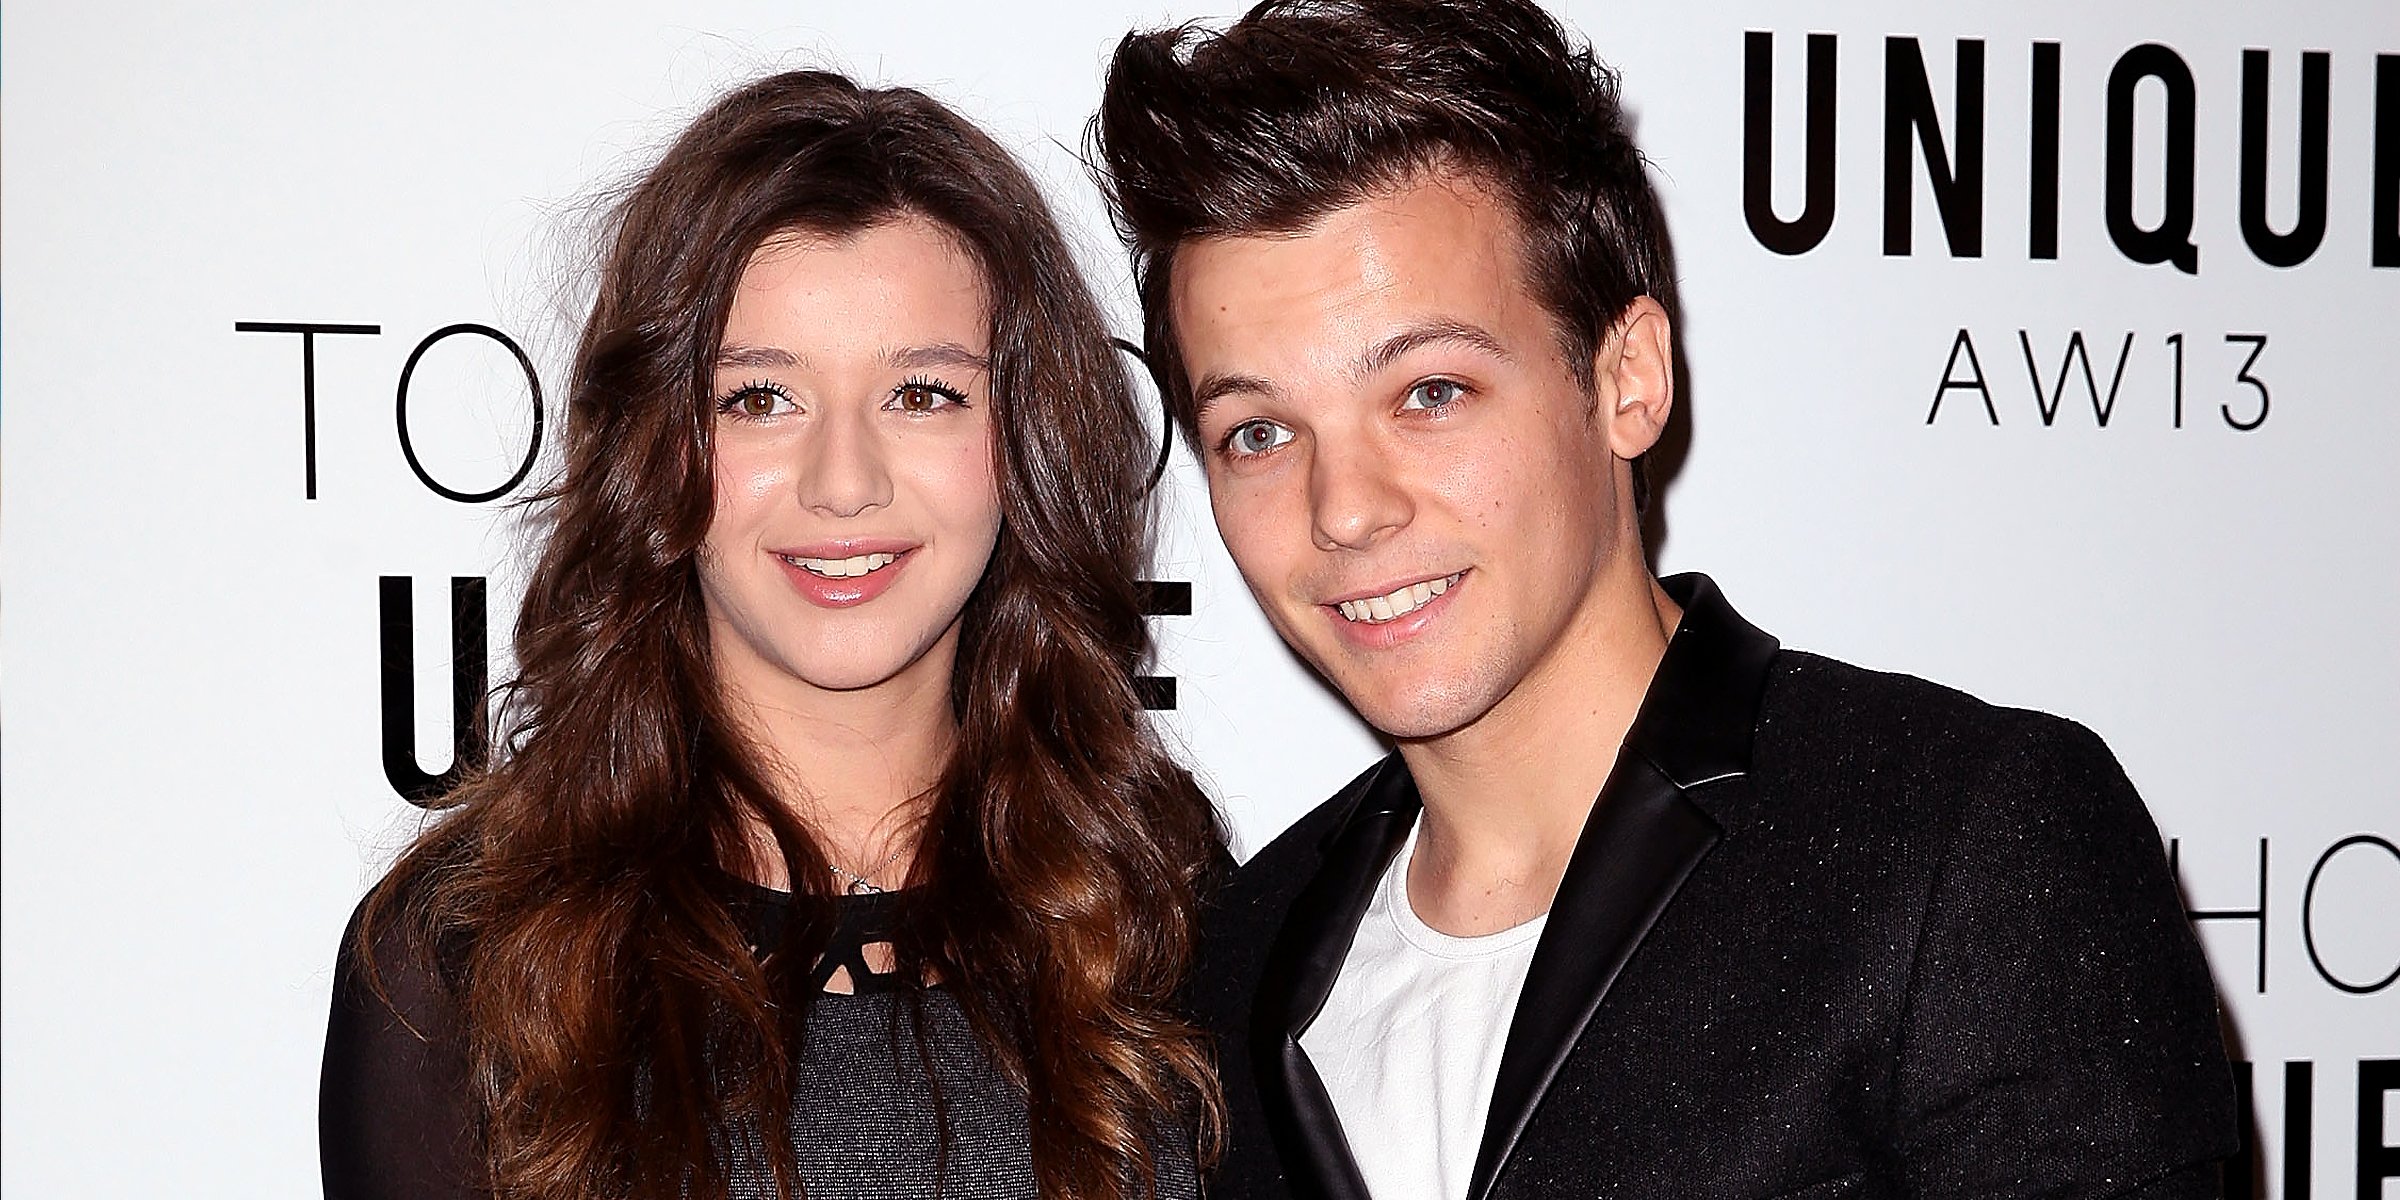 Eleanor Calder and Louis Tomlinson | Source: Getty Images